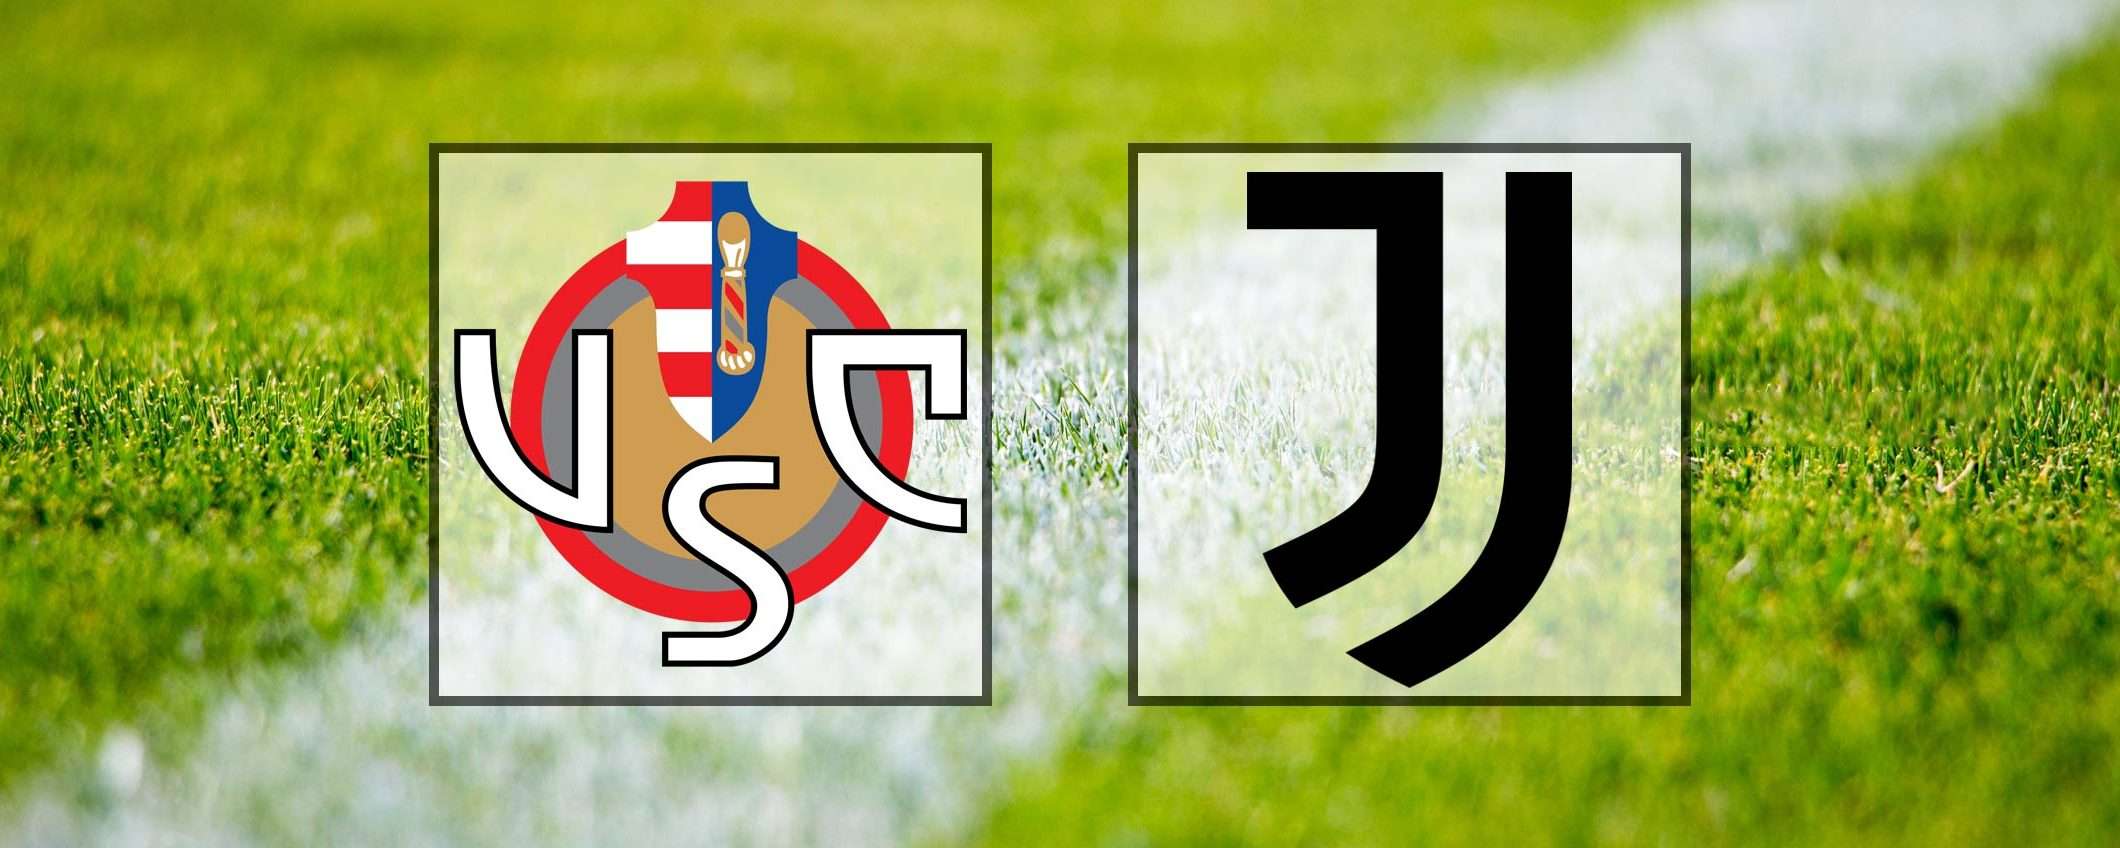 Come vedere Cremonese-Juventus in streaming